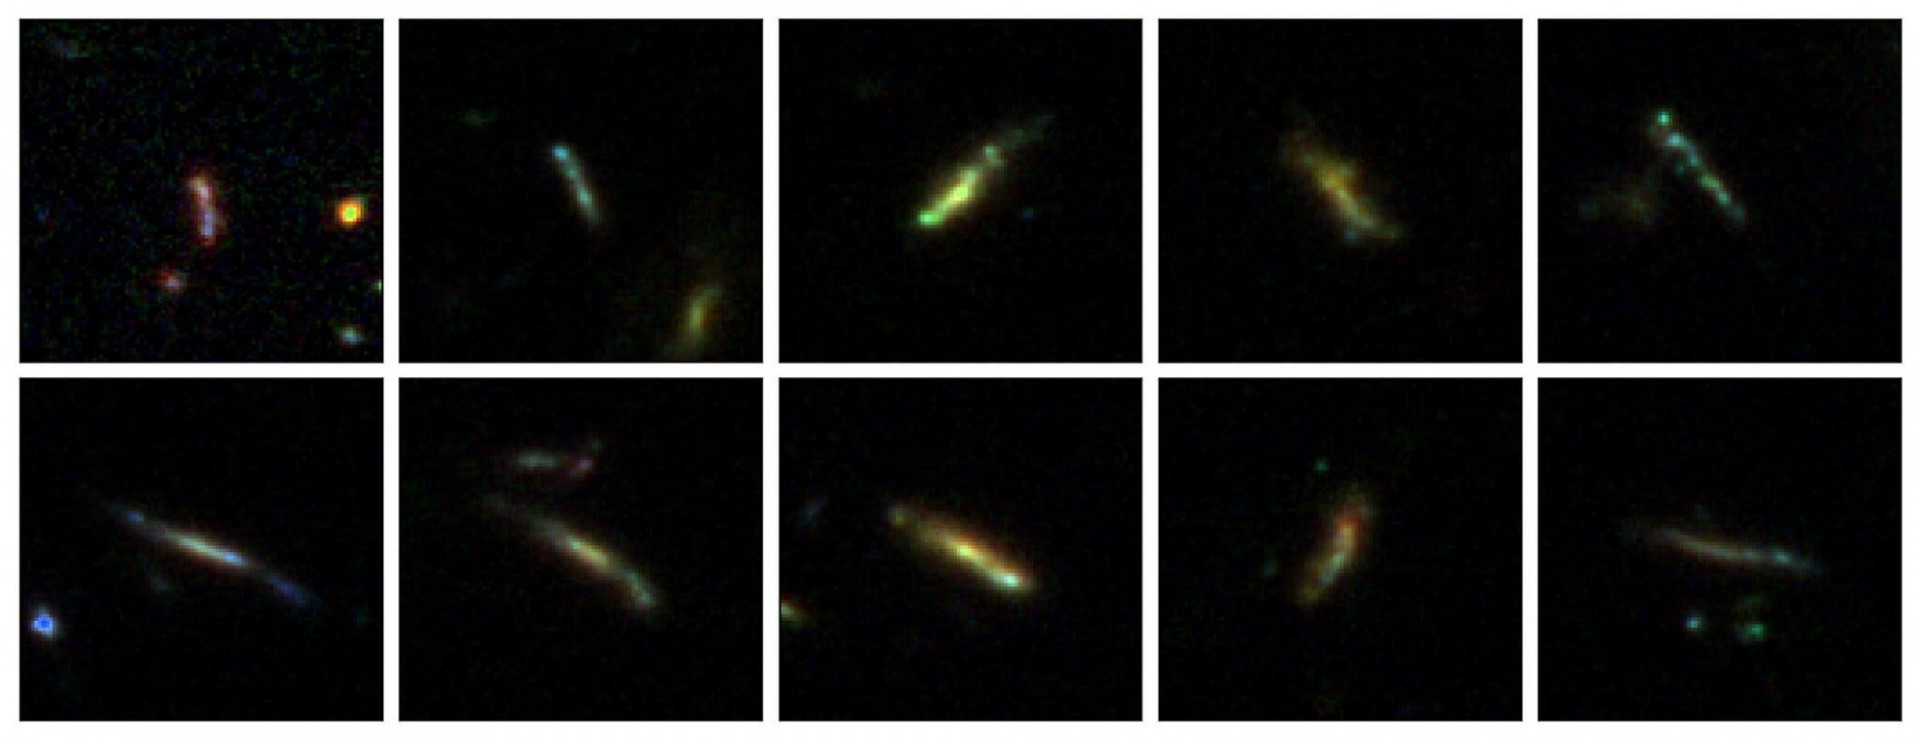 Images of cigar-shaped galaxies in the early universe.